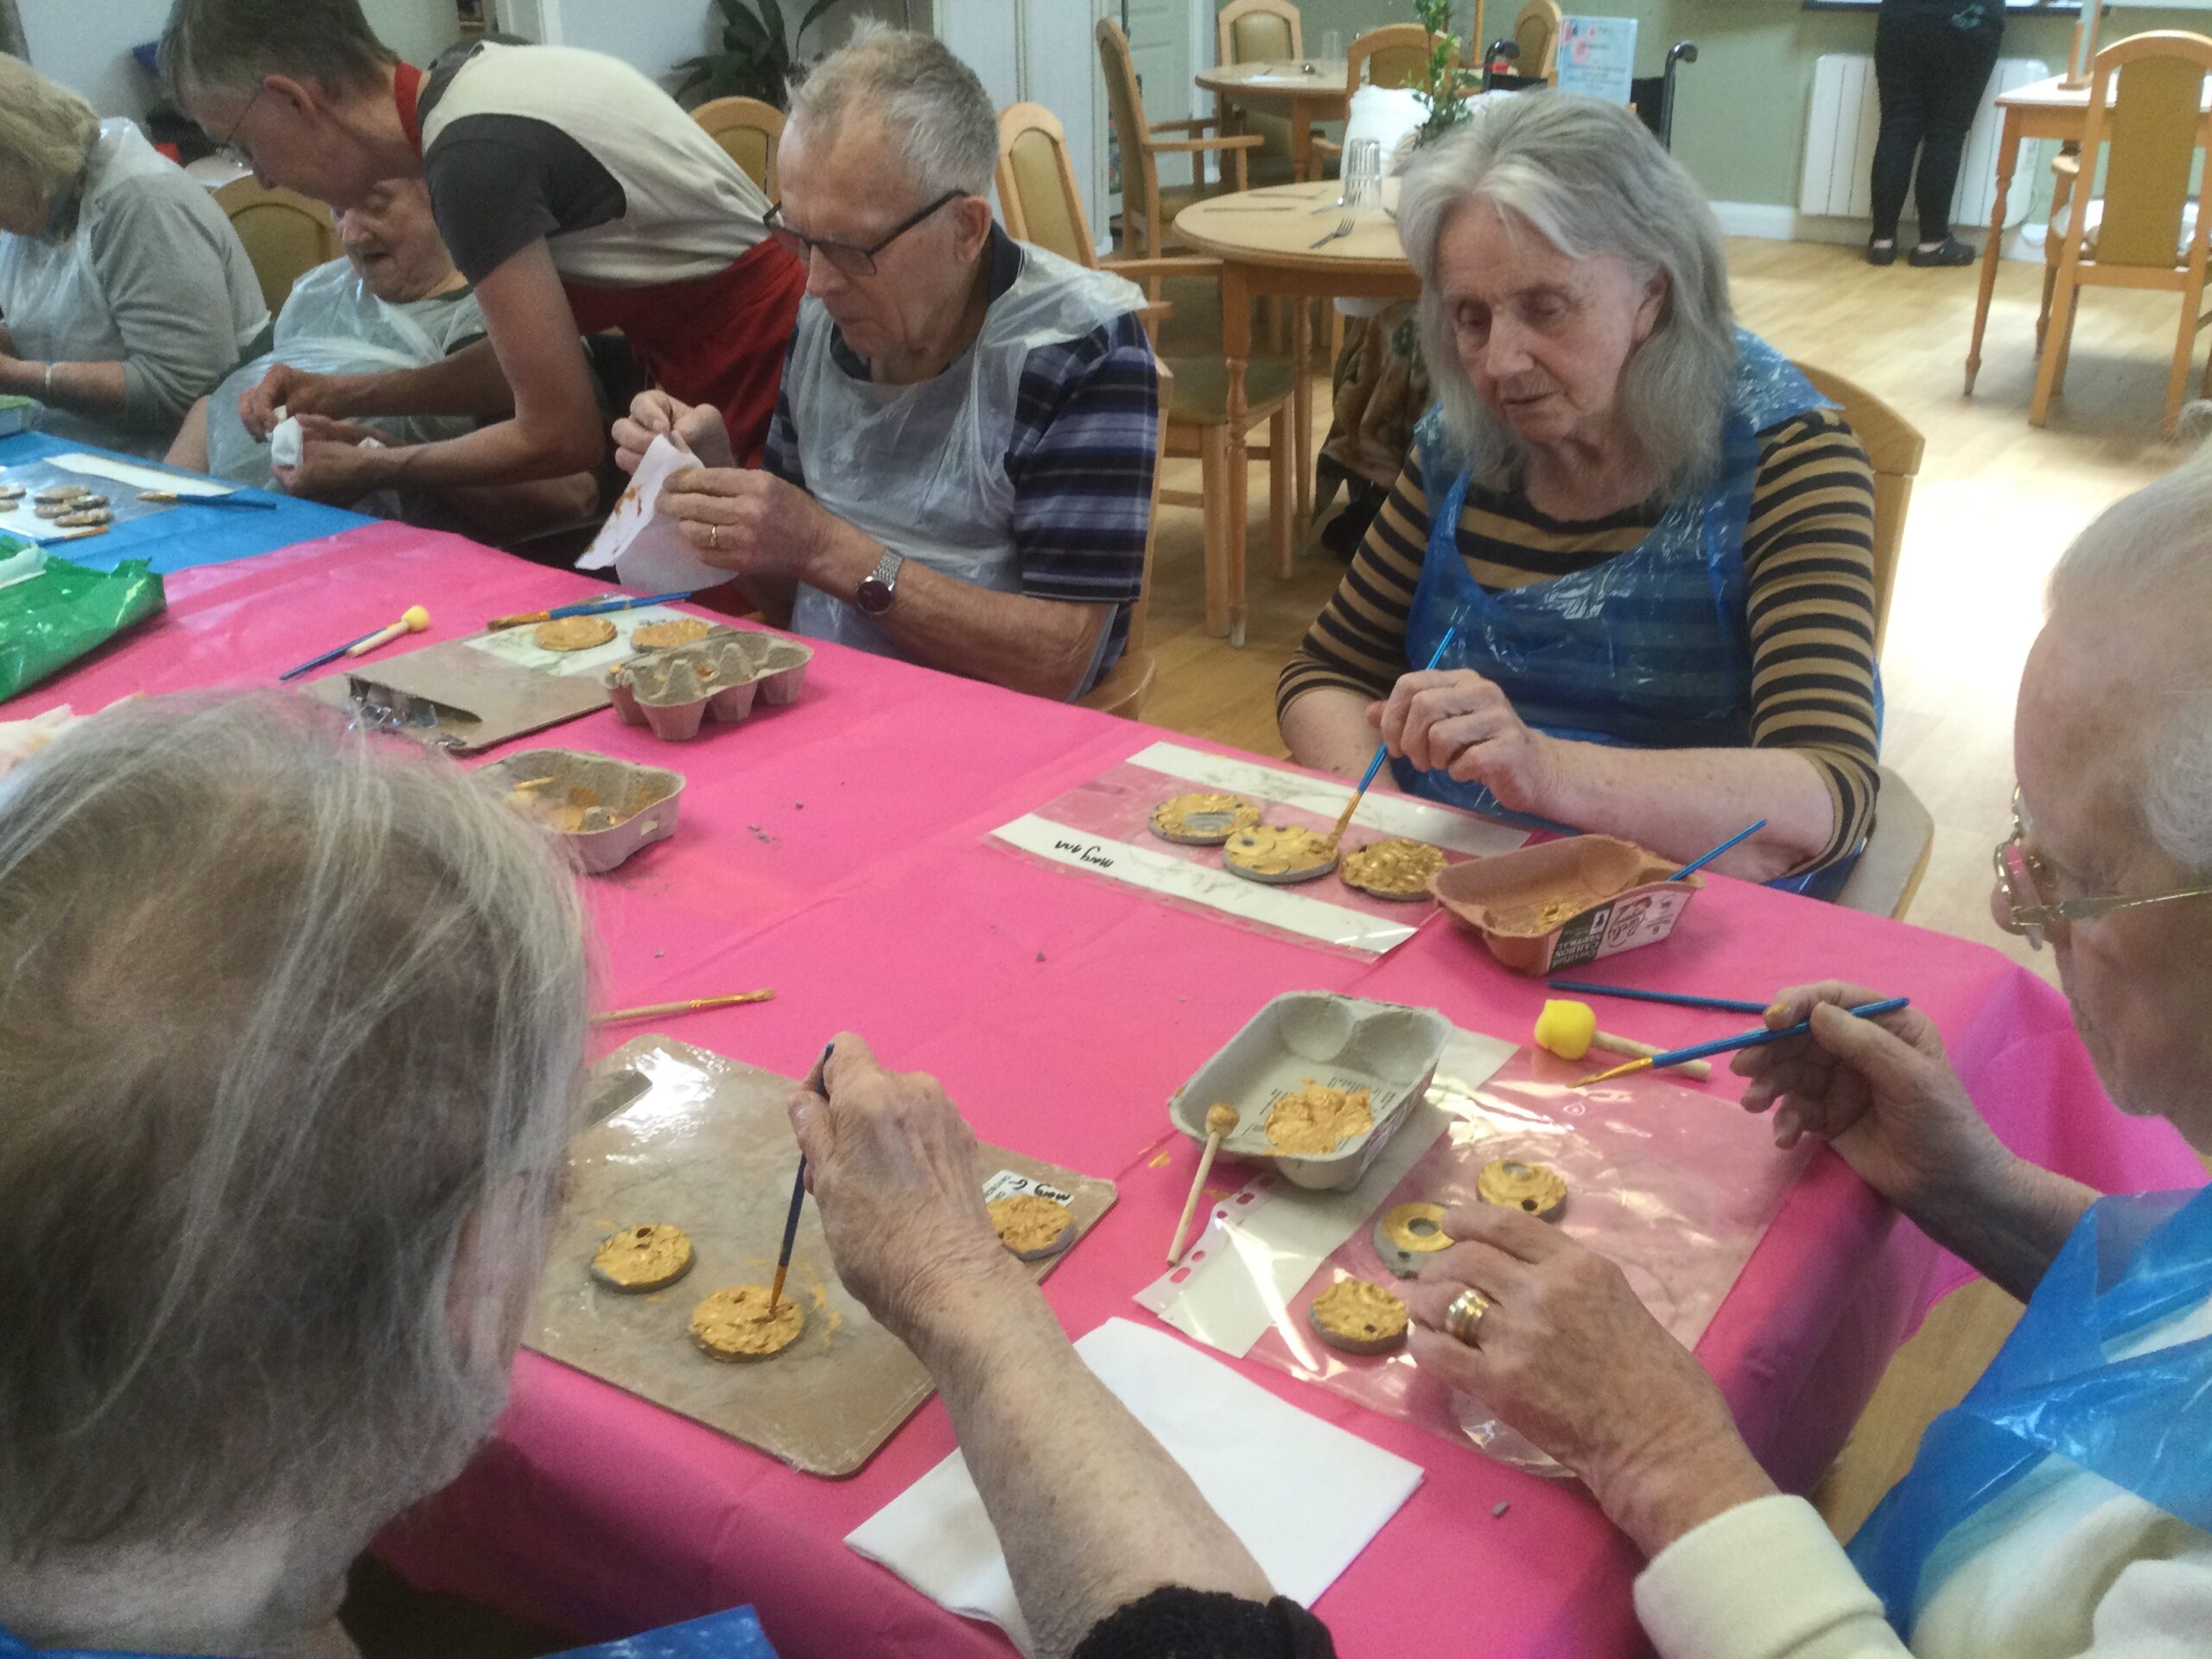 A group of people wearing blue plastic aprons seated at a table painting clay medals with gold paint